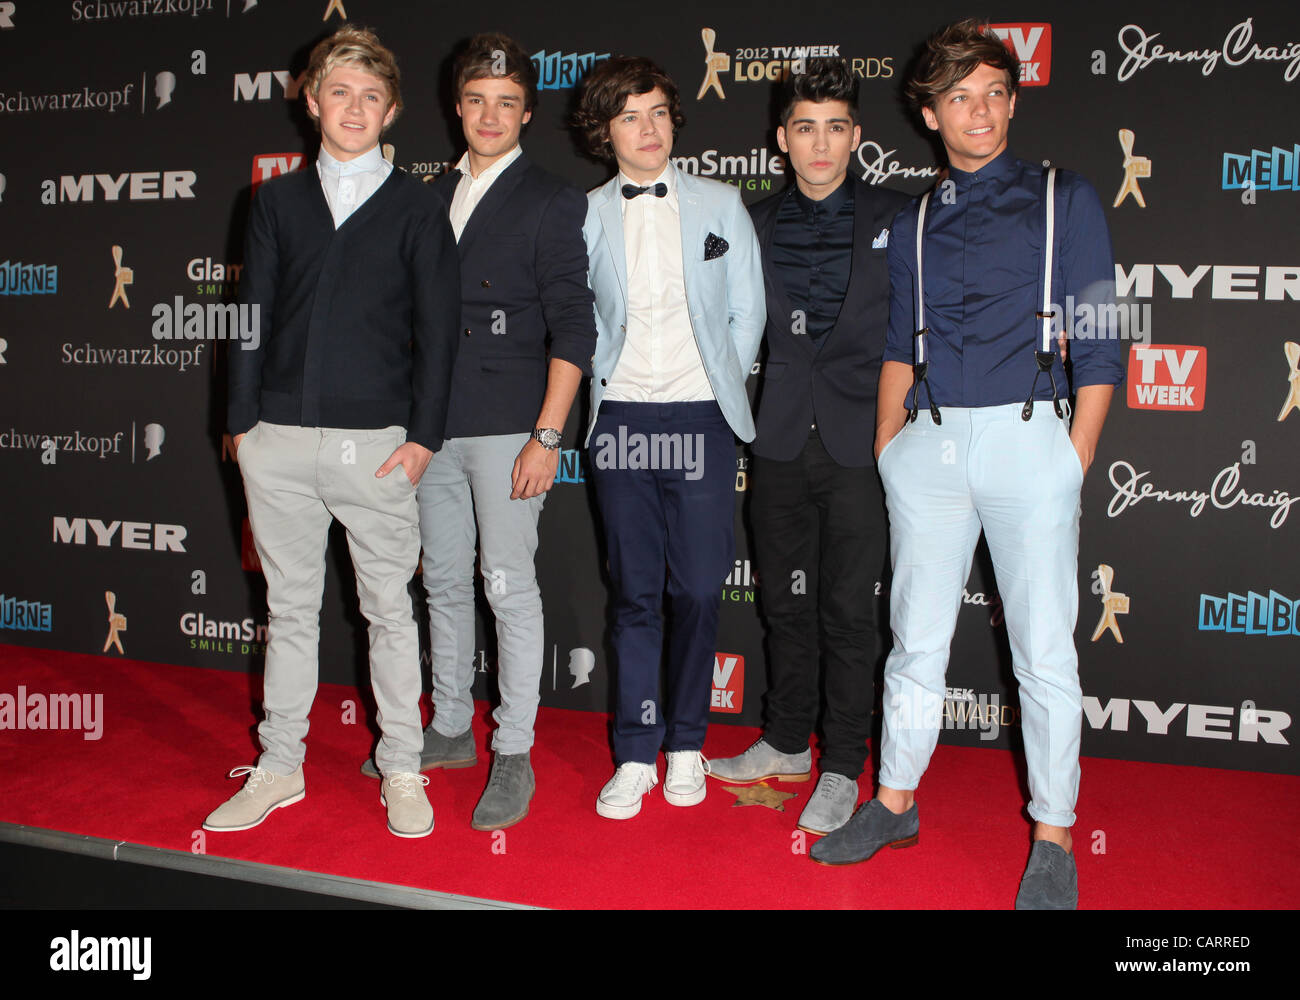 One Direction on the red carpet at the Logie Awards, Melbourne April 15, 2012. Stock Photo